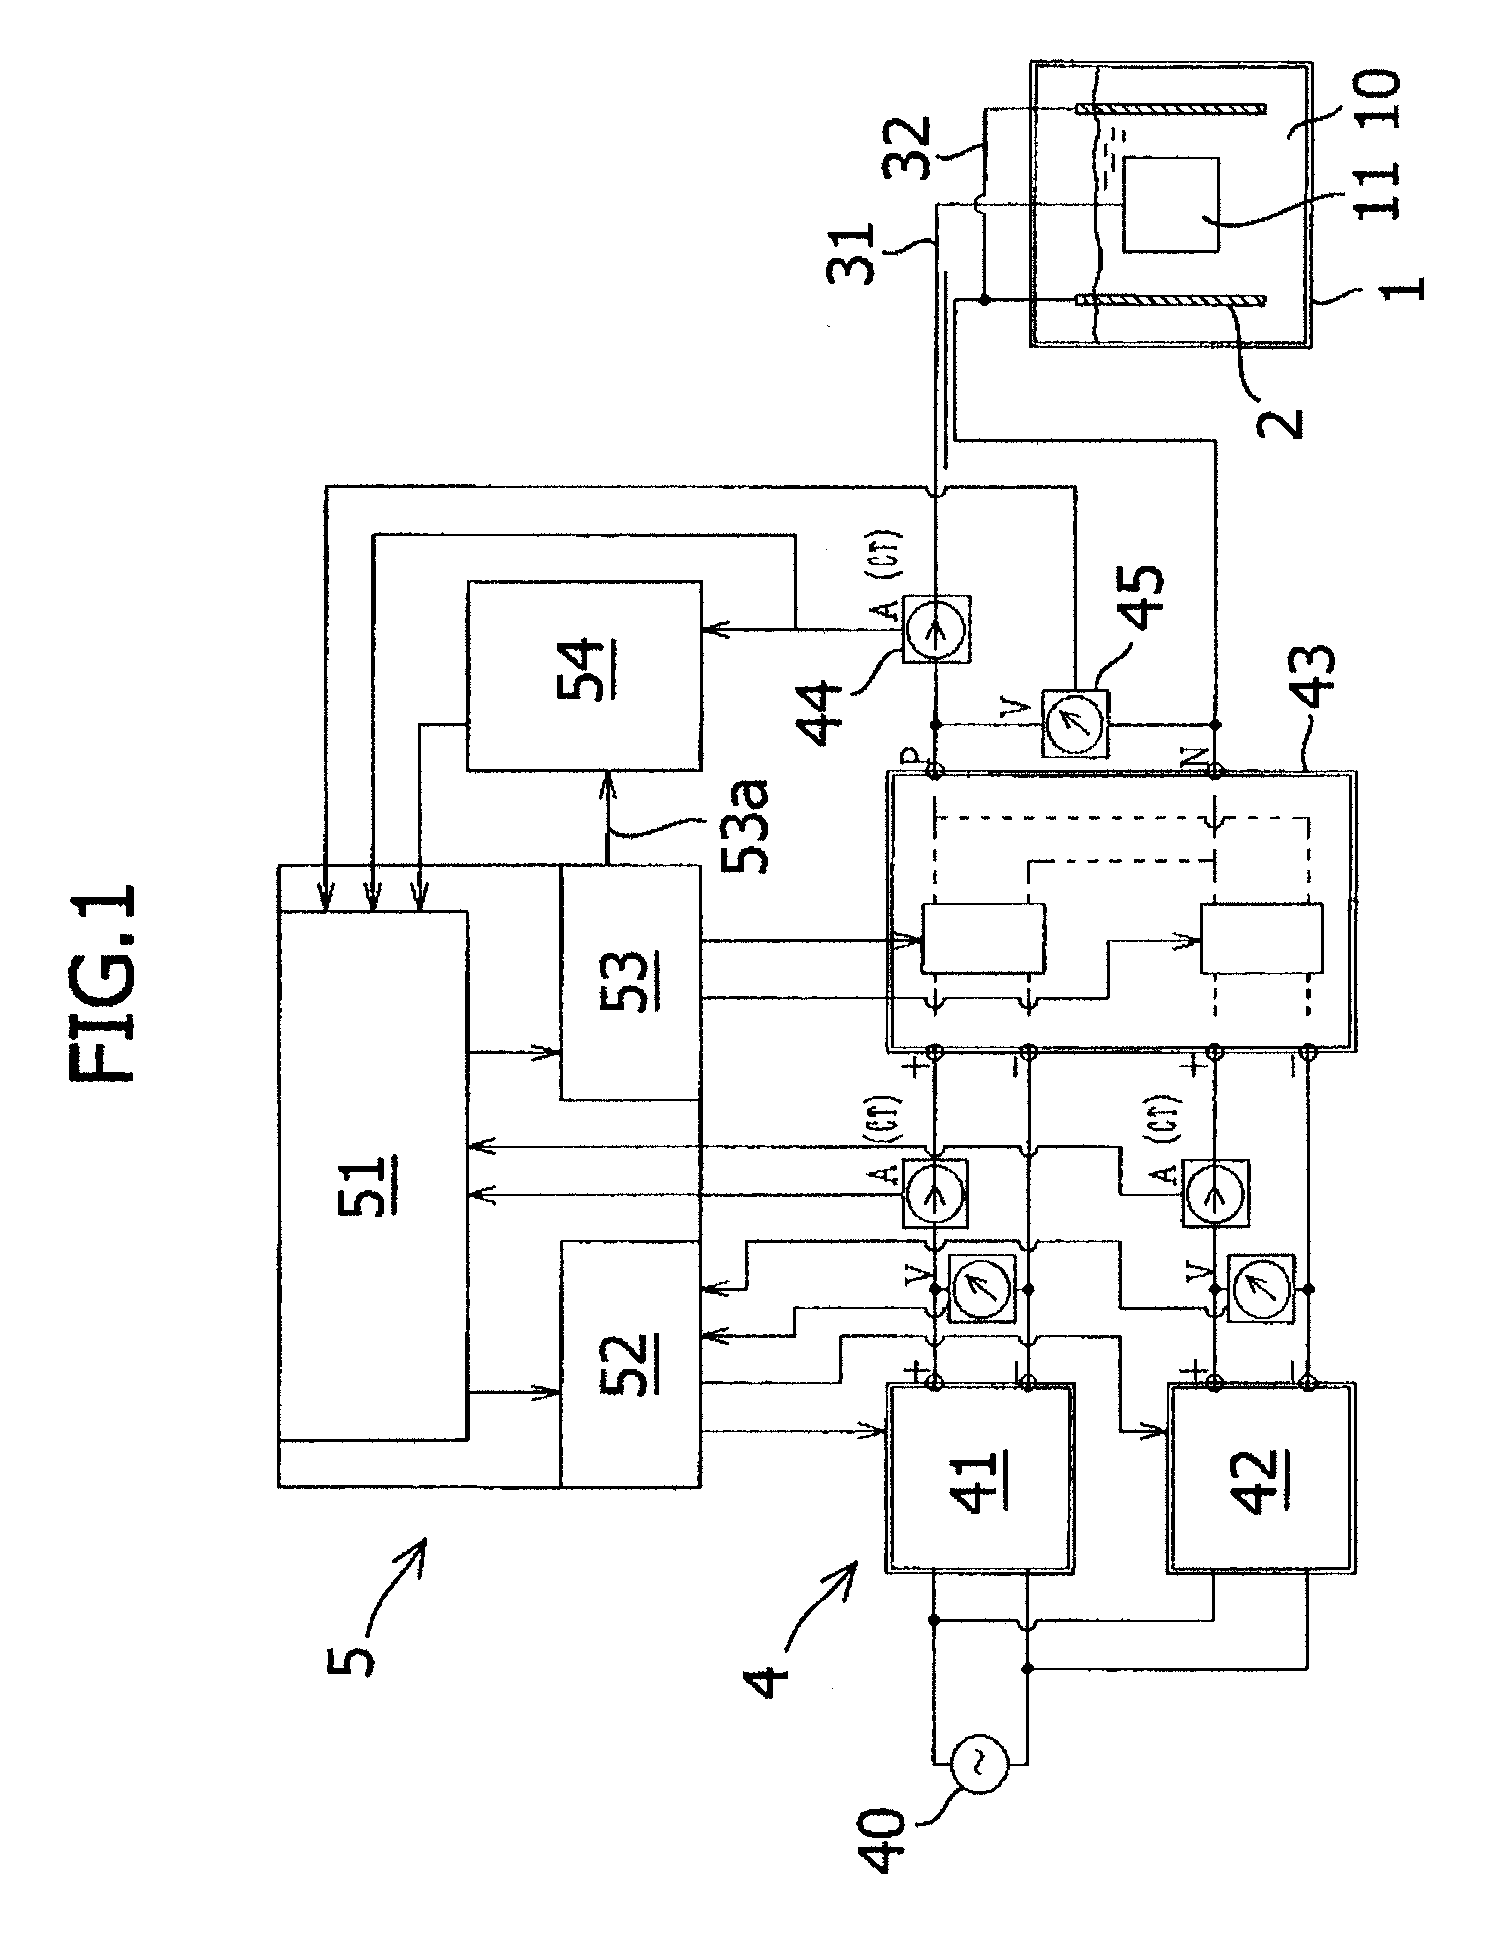 Anodizing method and apparatus